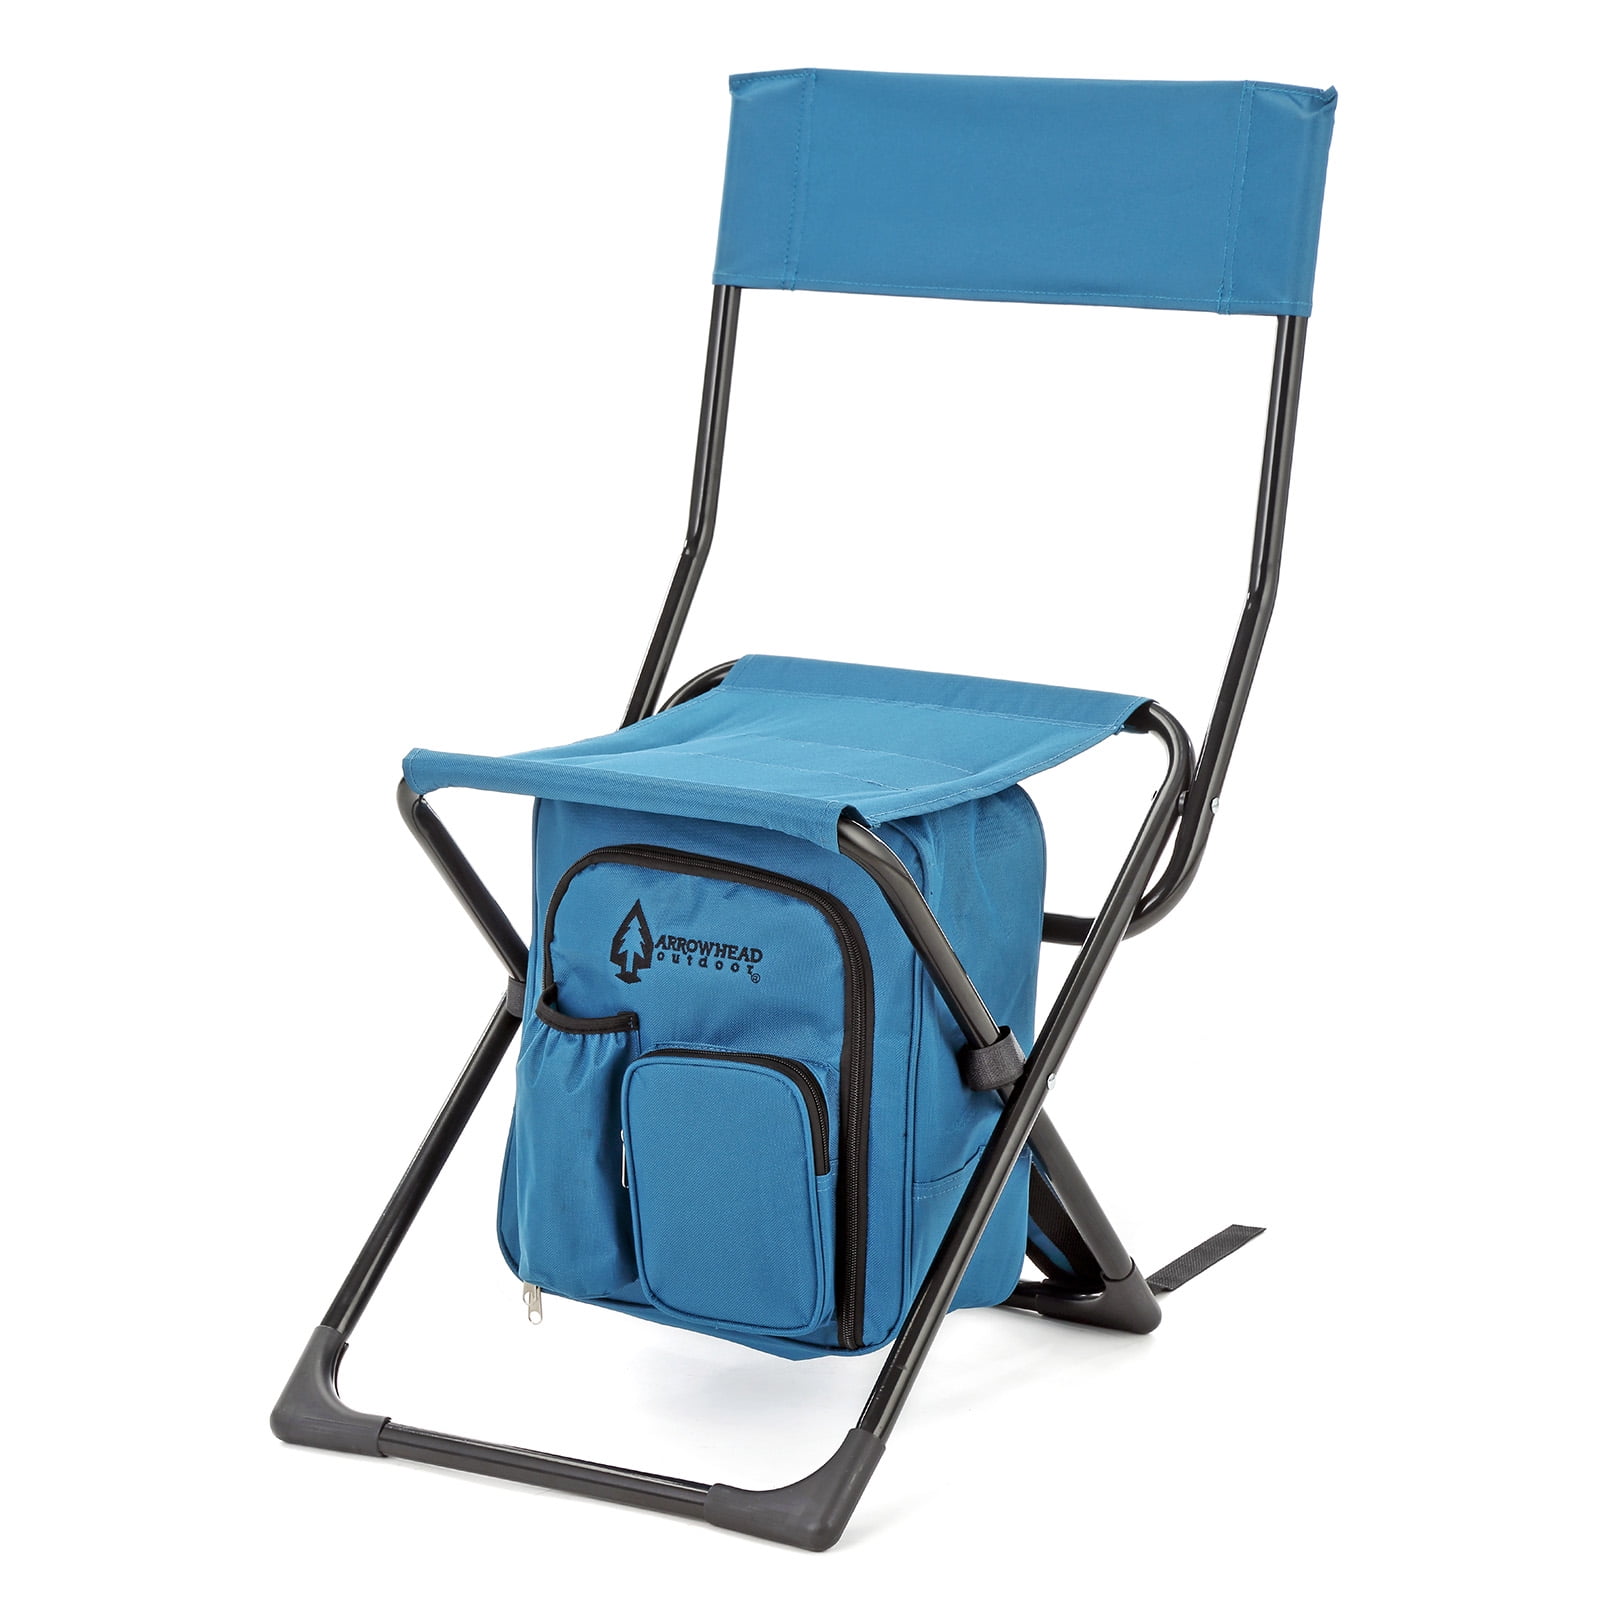 ARROWHEAD OUTDOOR Multi-Function 3-in-1 Compact Fishing Chair: Backpack,  Stool & Insulated Cooler, Ocean Blue